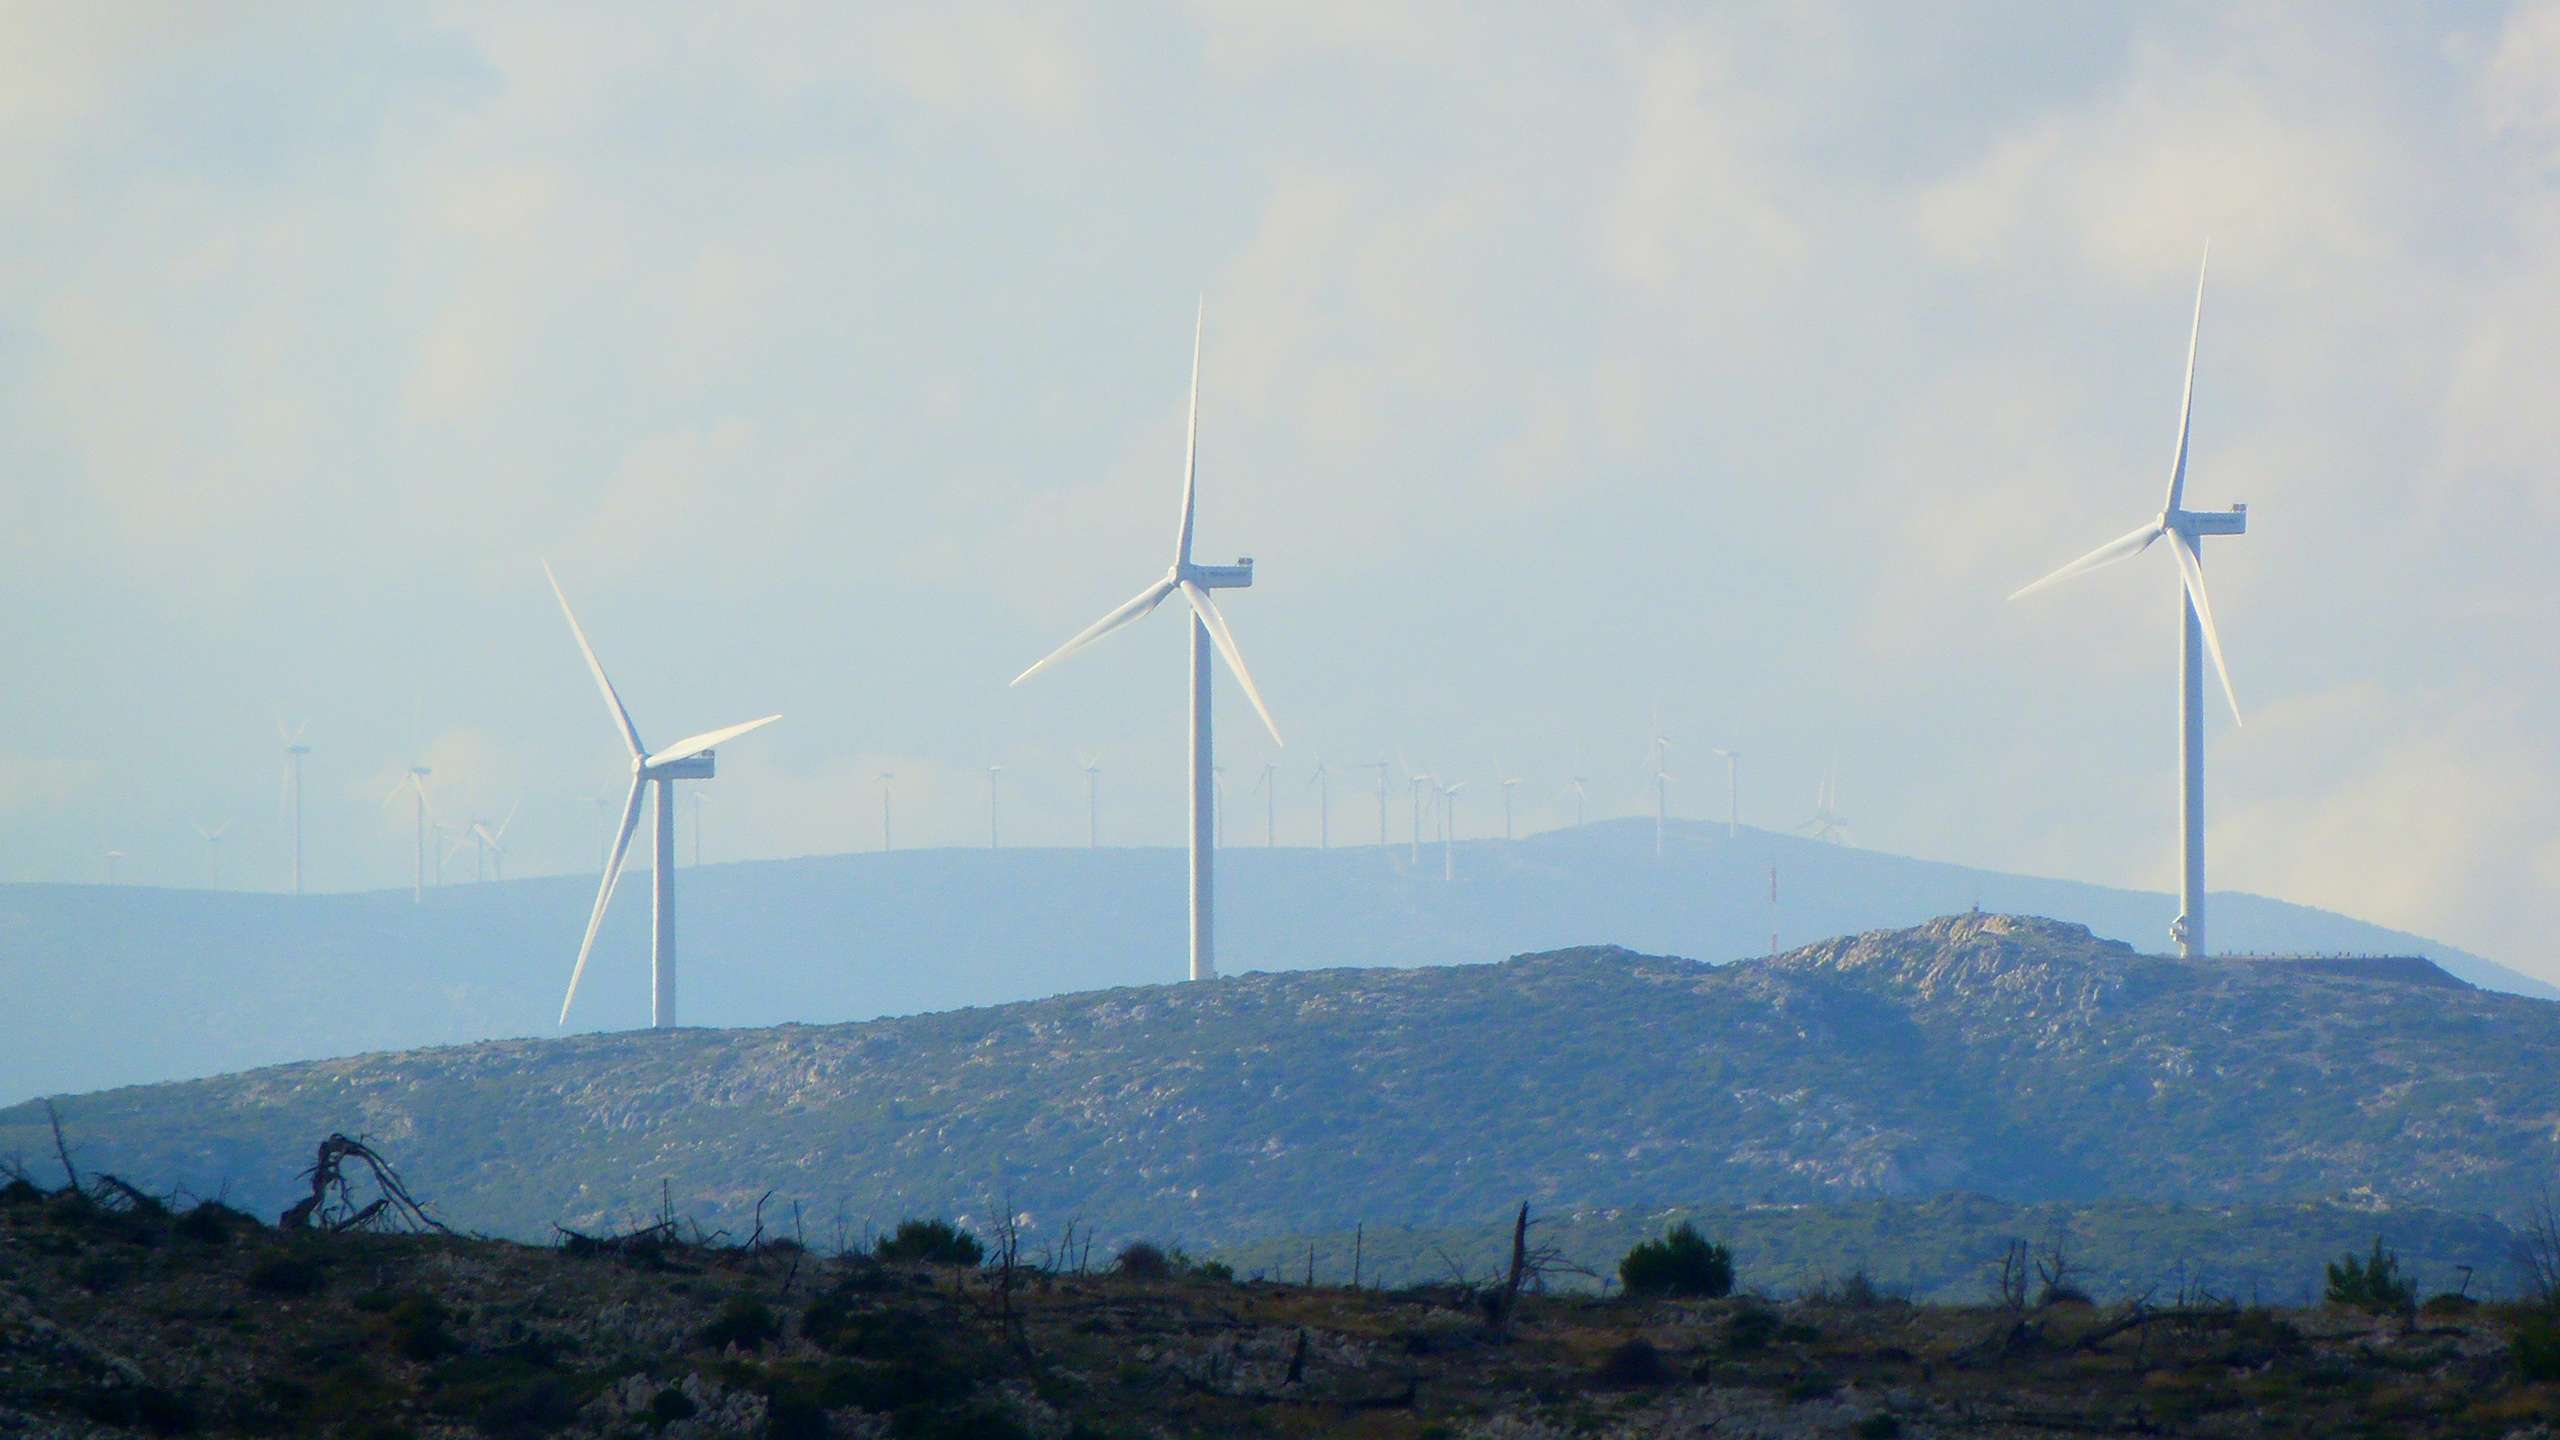 Three wind turbines stand on a hill. The sky is cloudy and colours the landscape blue and grey.